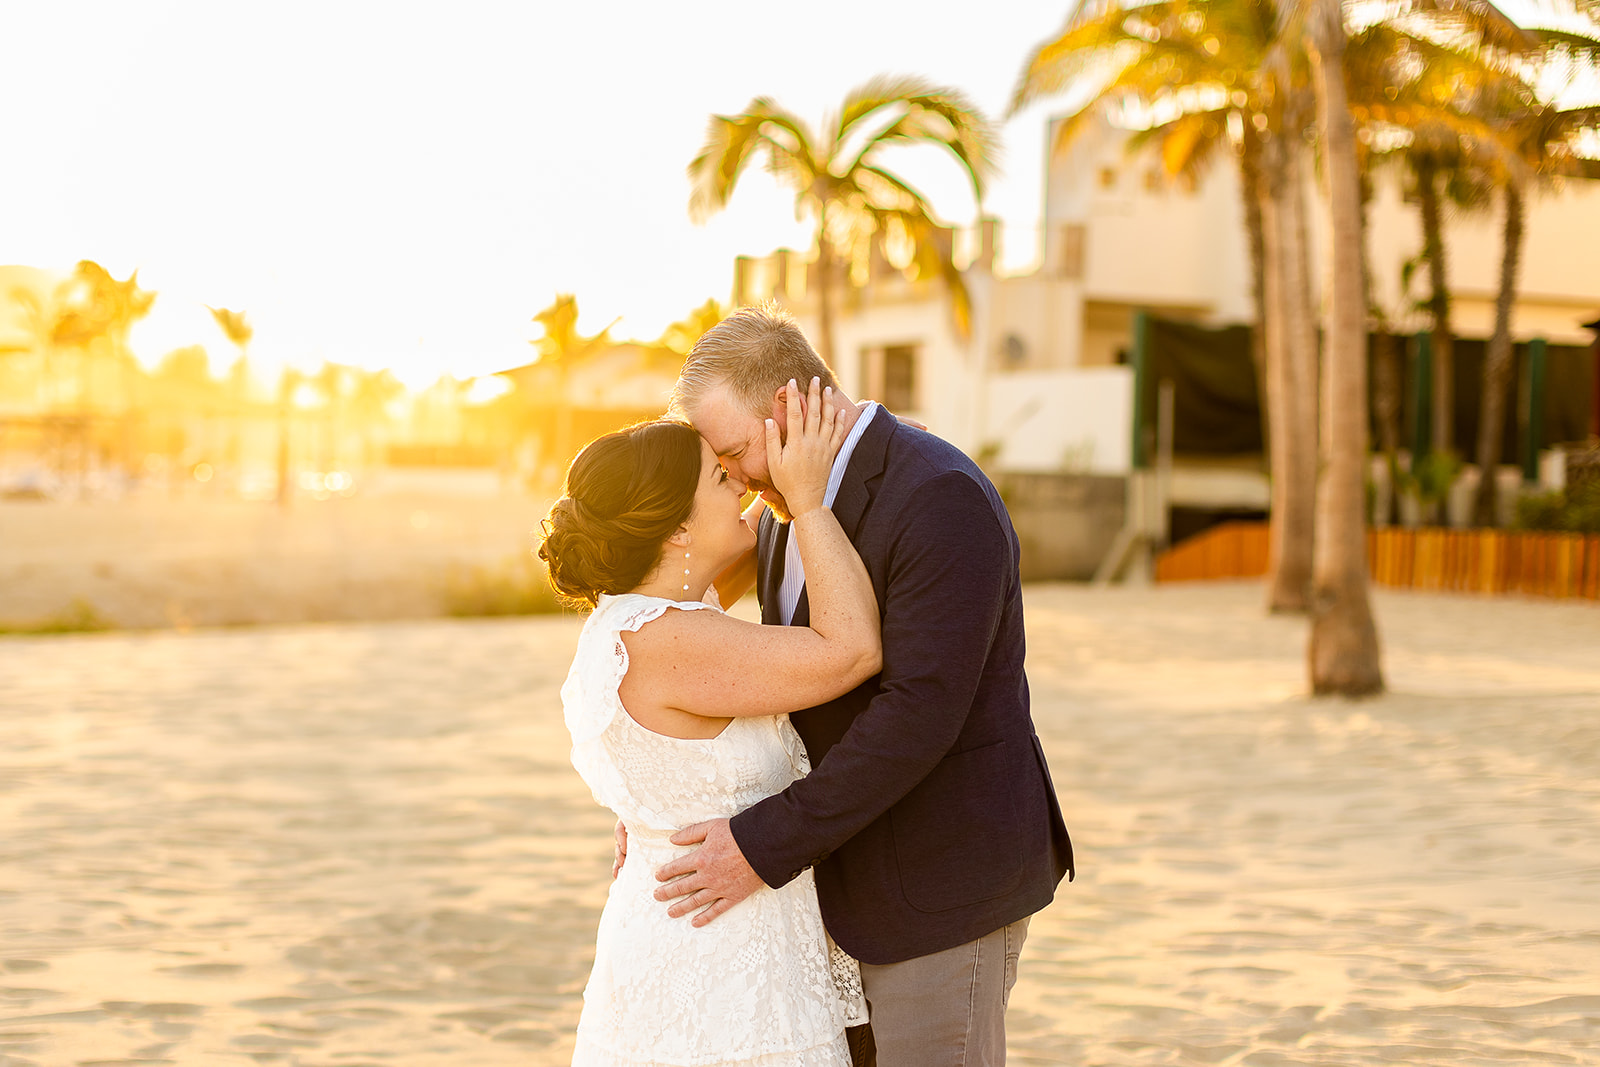 Man and woman going forehead to forhead and hugging on the beach